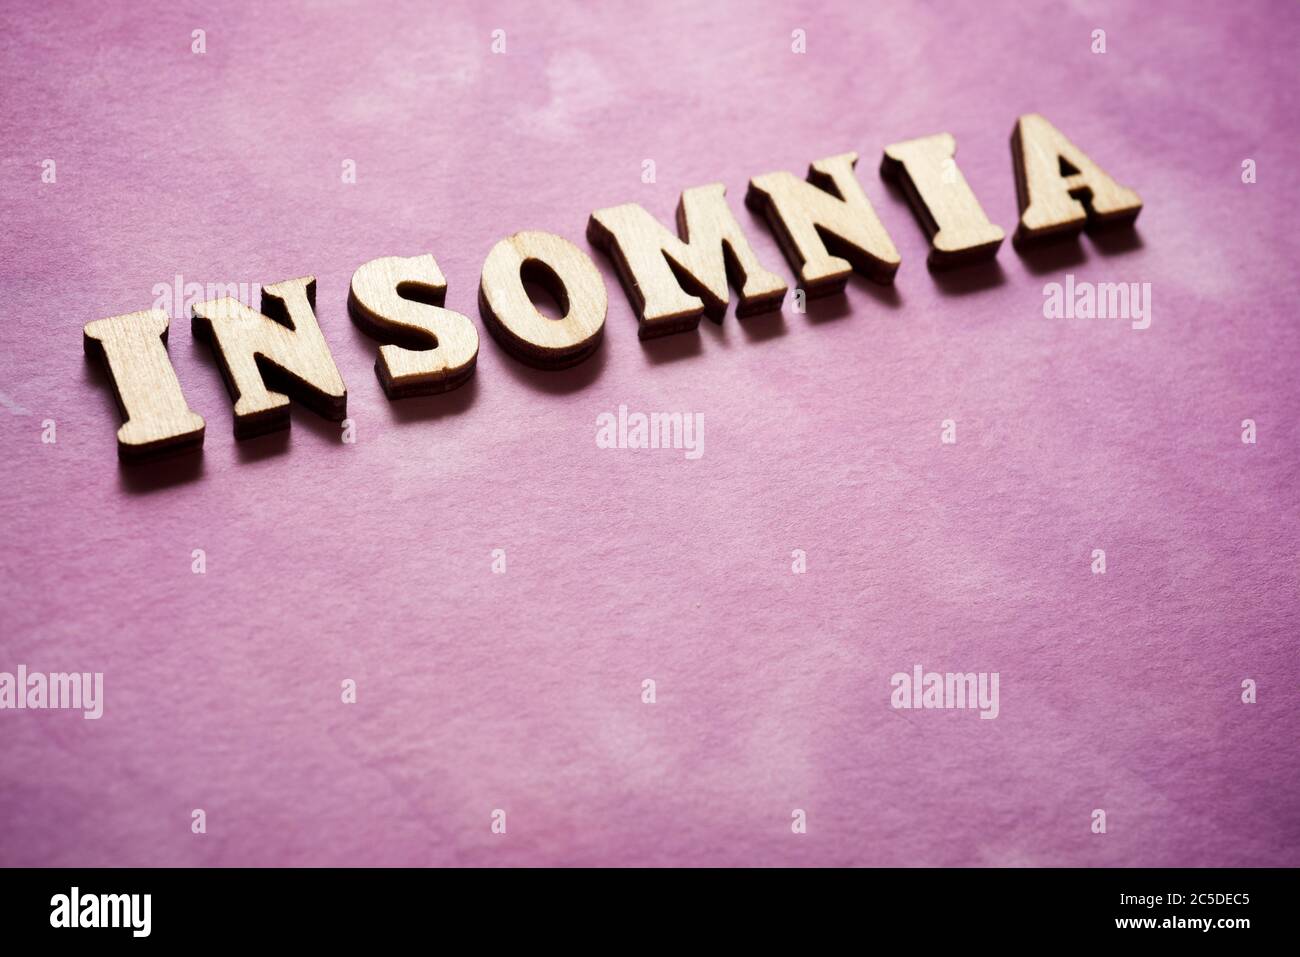 Insomnia text on a colored paper. Stock Photo